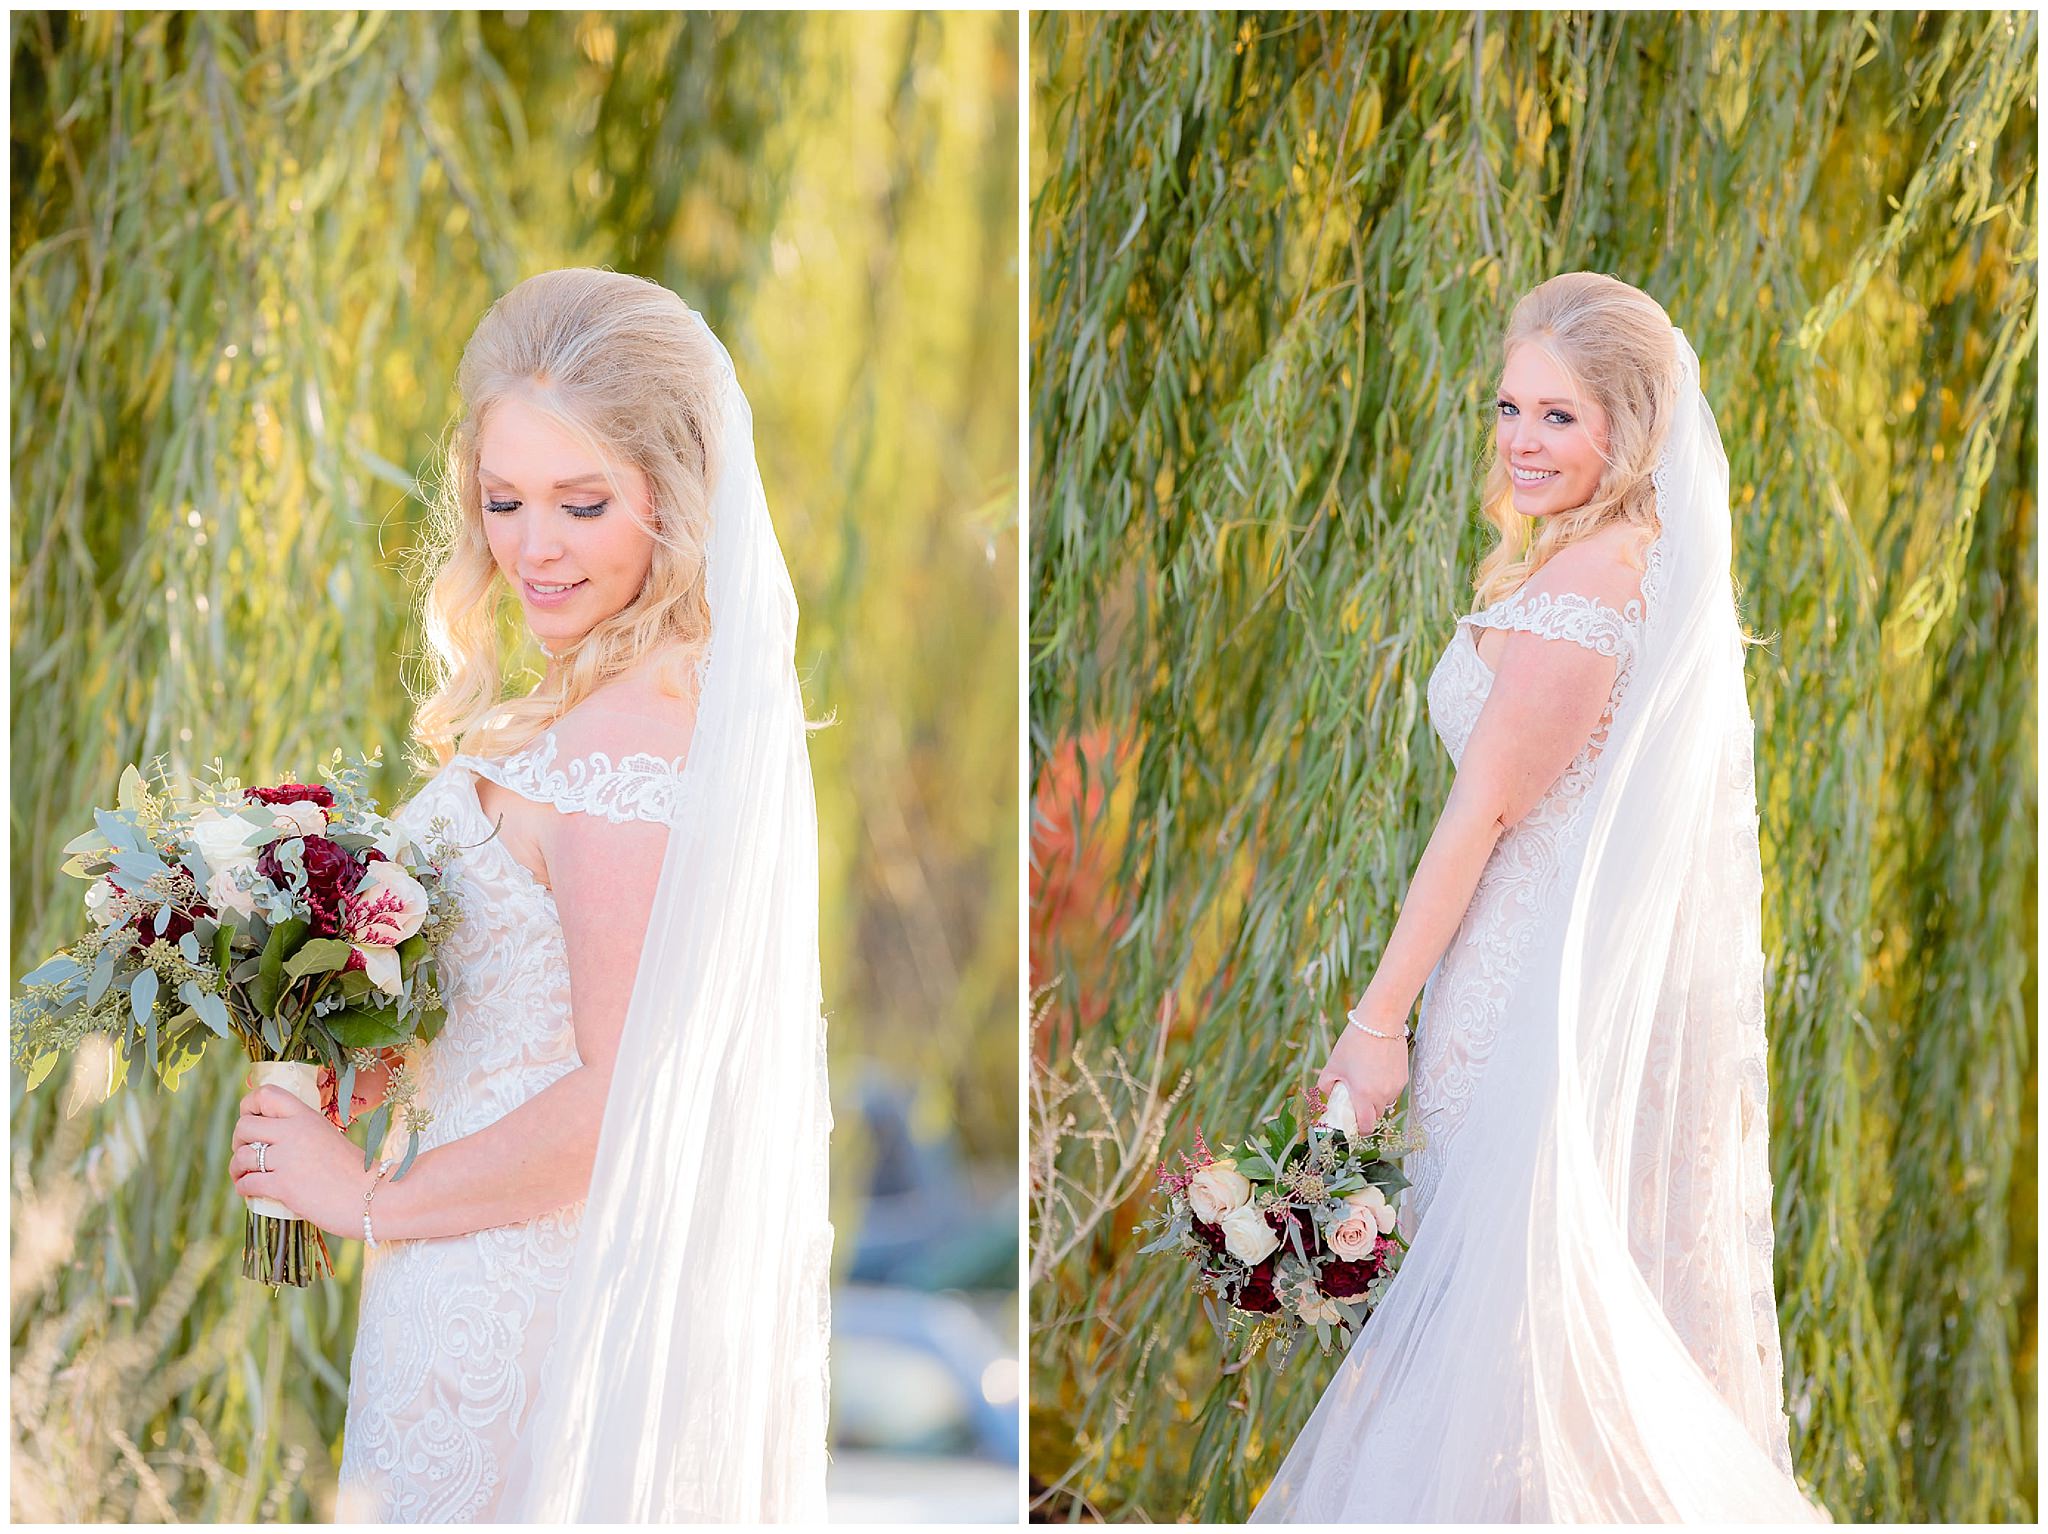 Bride in an Allure wedding gown from MB Bride at her Riverside Landing wedding